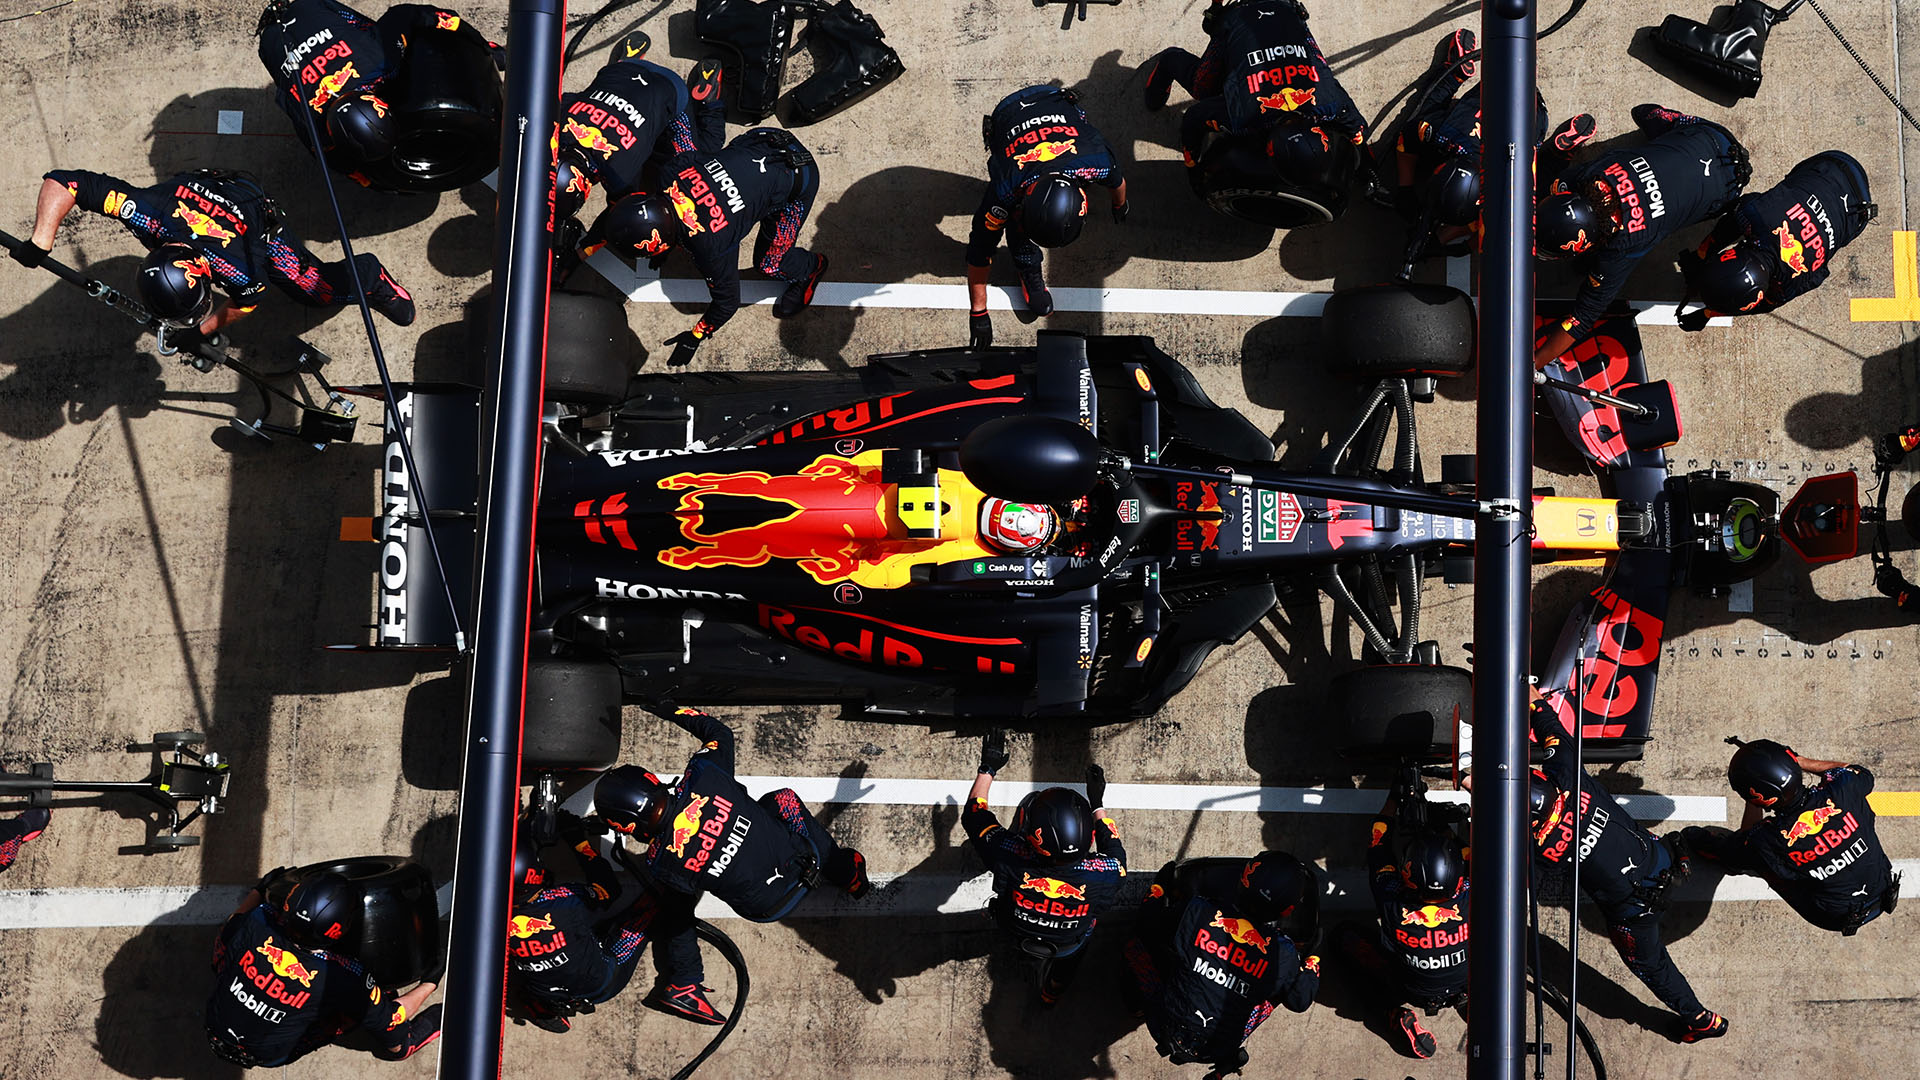 Horner praises Perez for 'driving the wheels off the car' after Red Bull pit stop error. Formula 1®